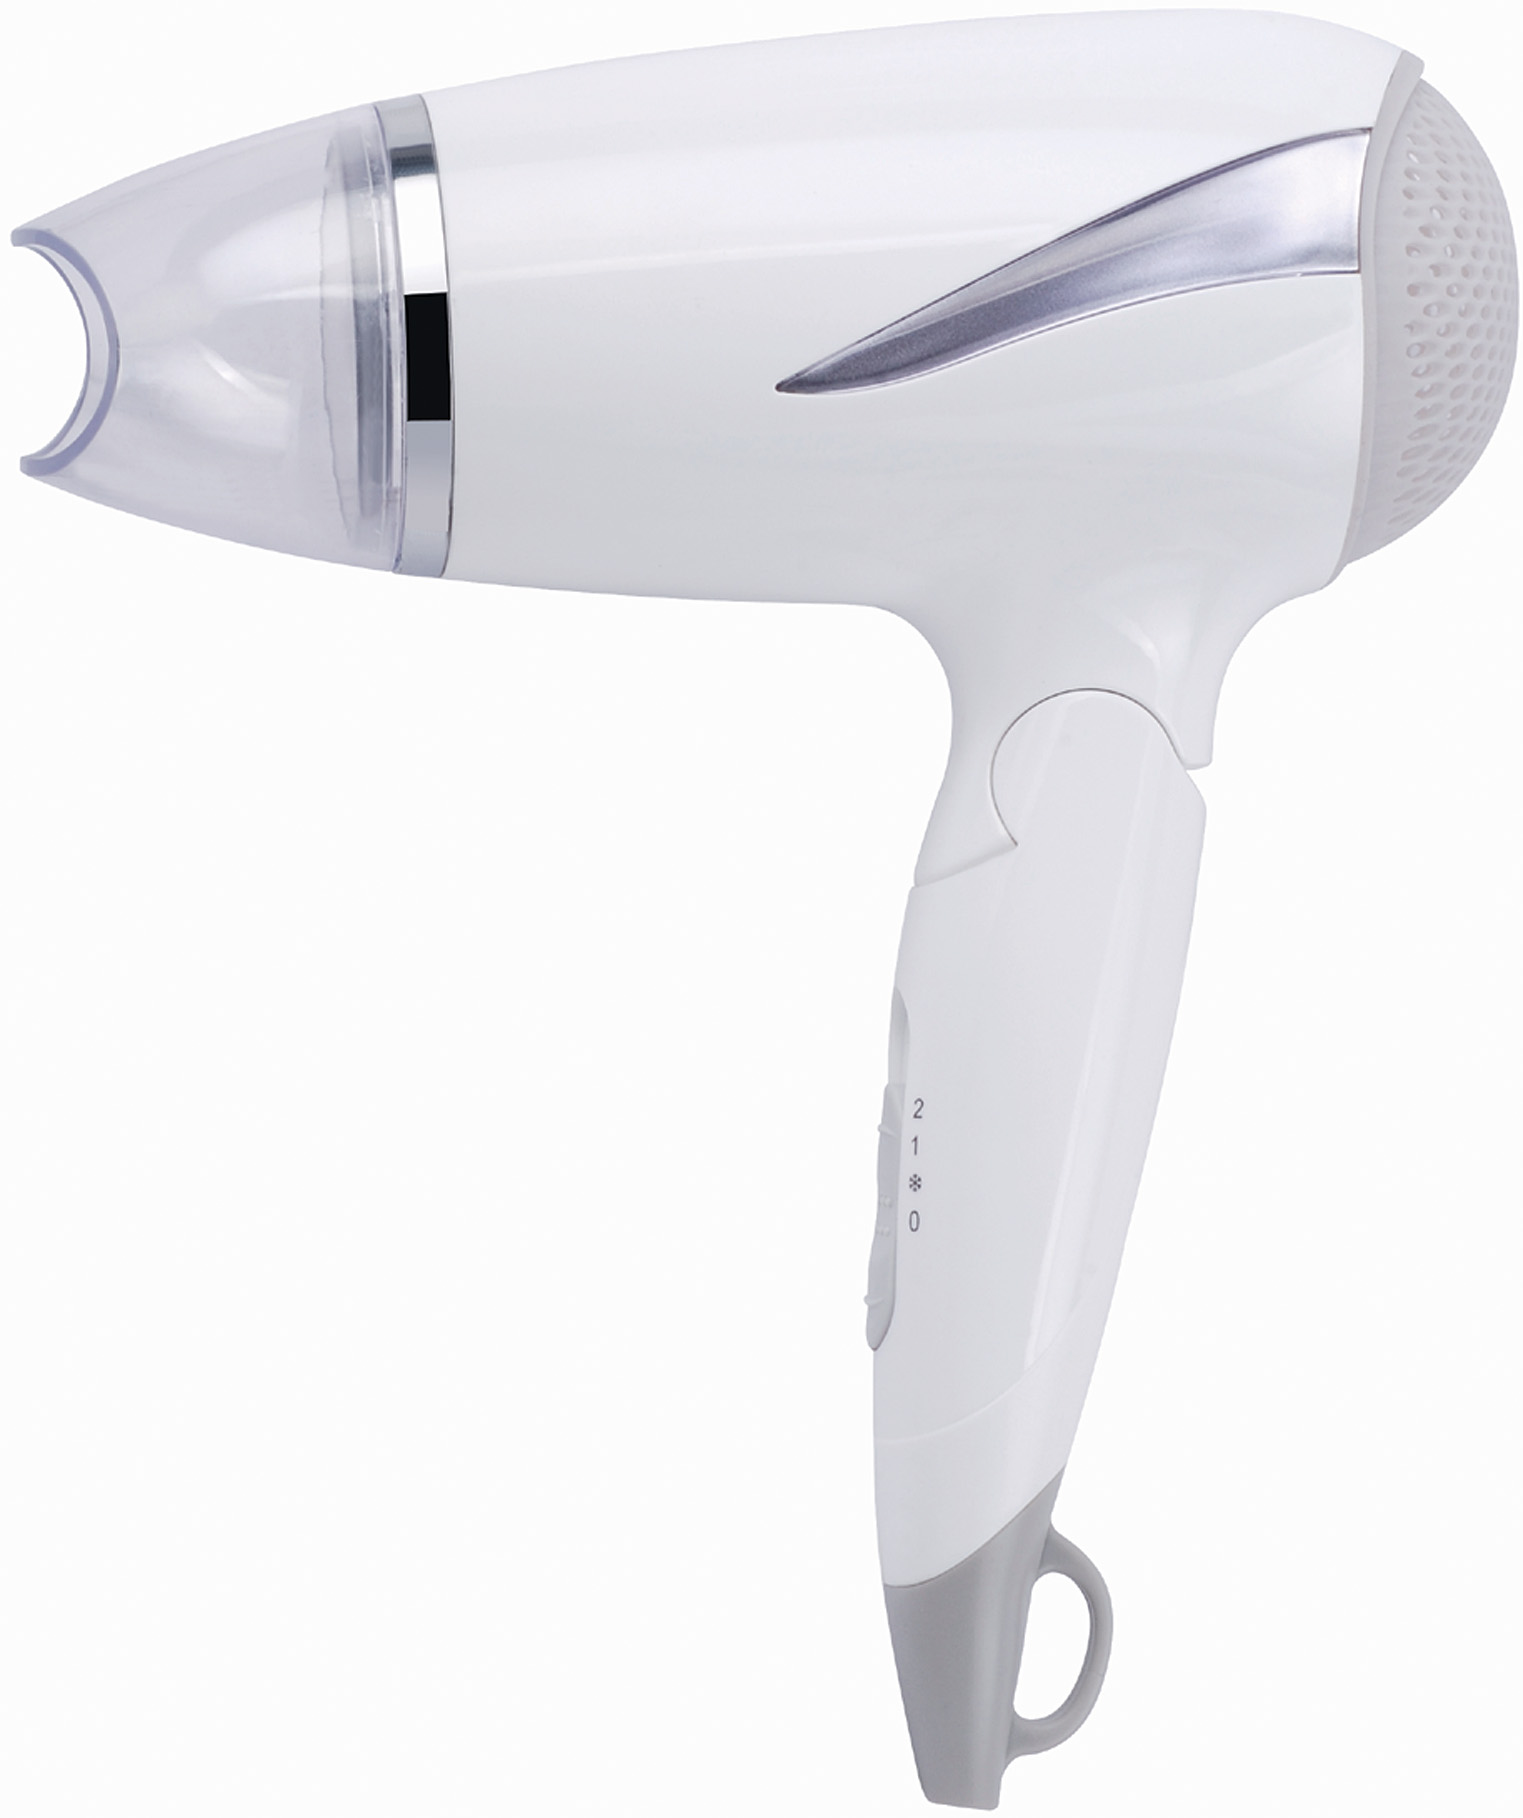 RCY2029A 1200w Hotel/Travel Lonic Hair Dry... Made in Korea